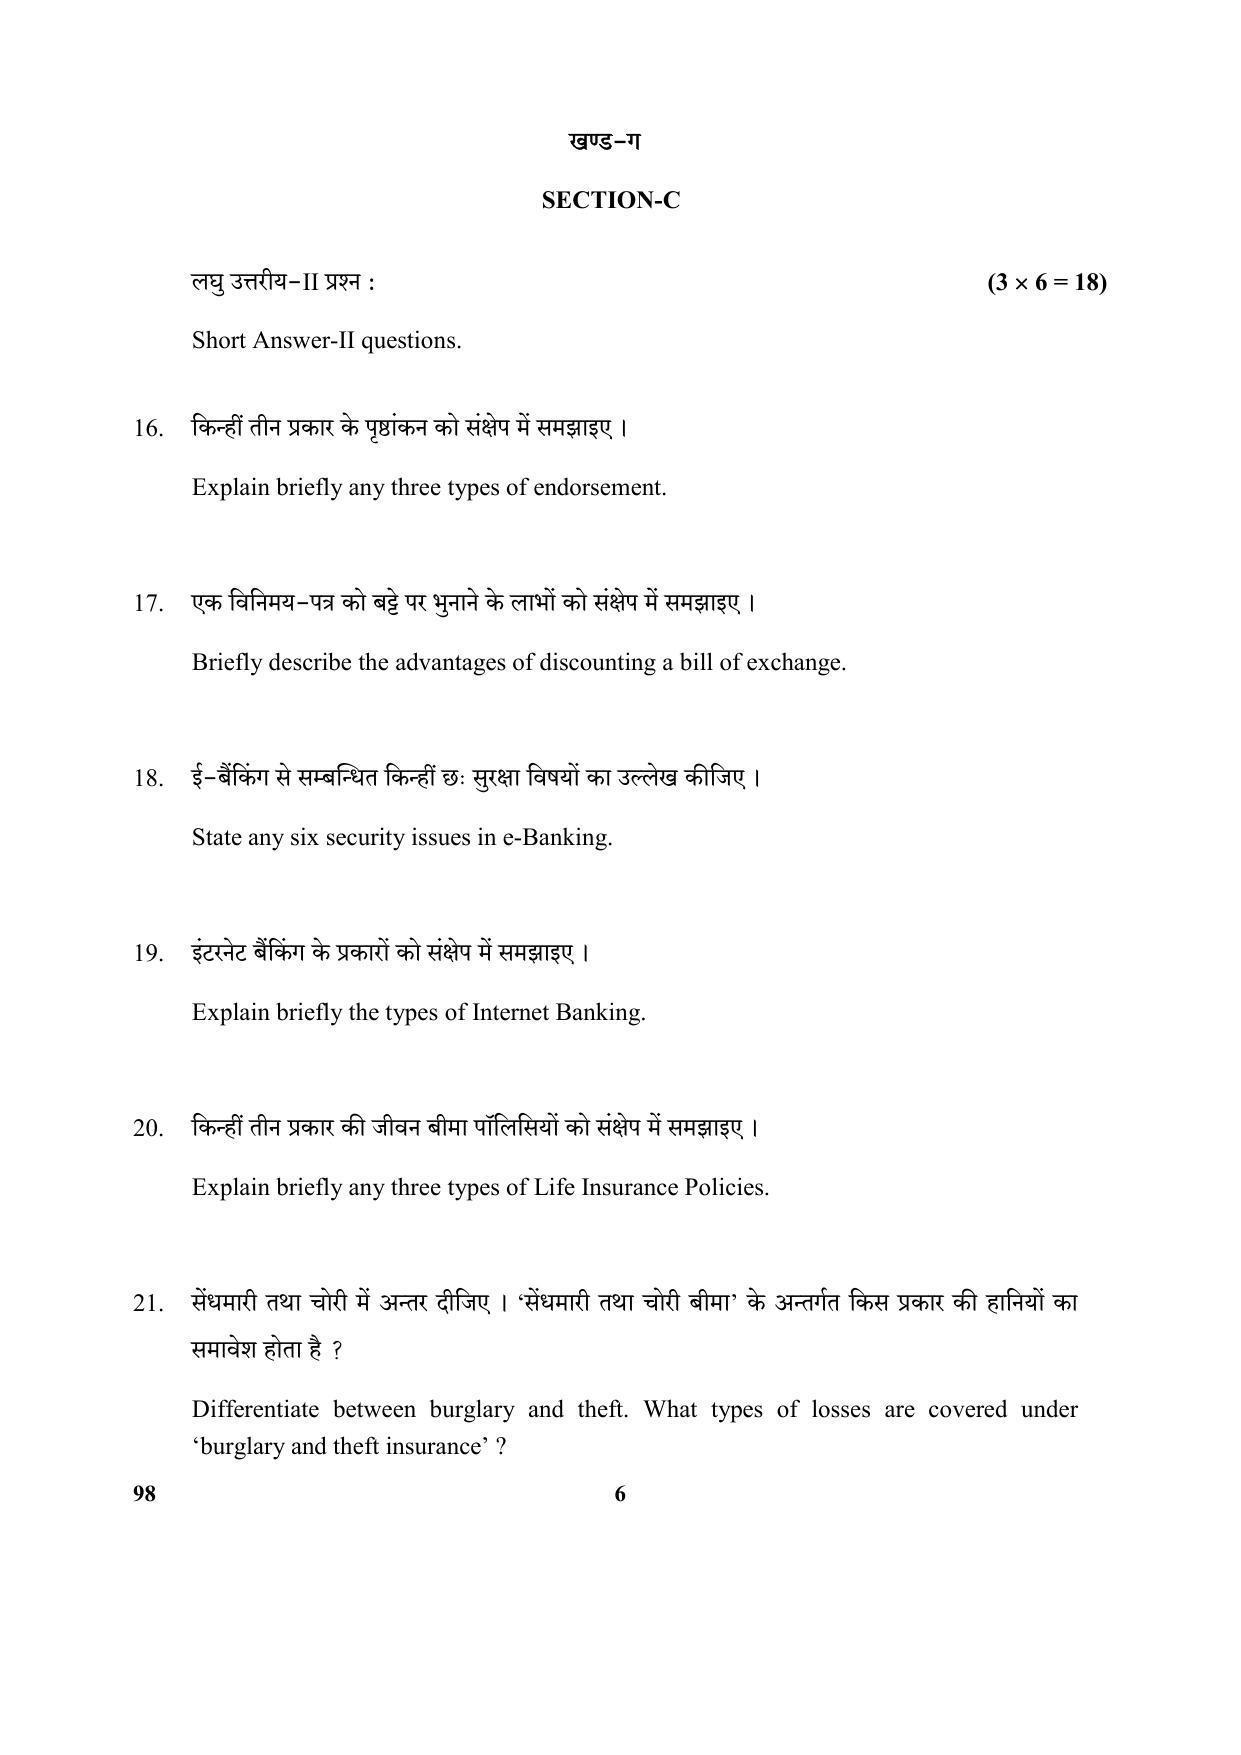 CBSE Class 10 98 (Banking & Insurance) 2018 Question Paper - Page 6